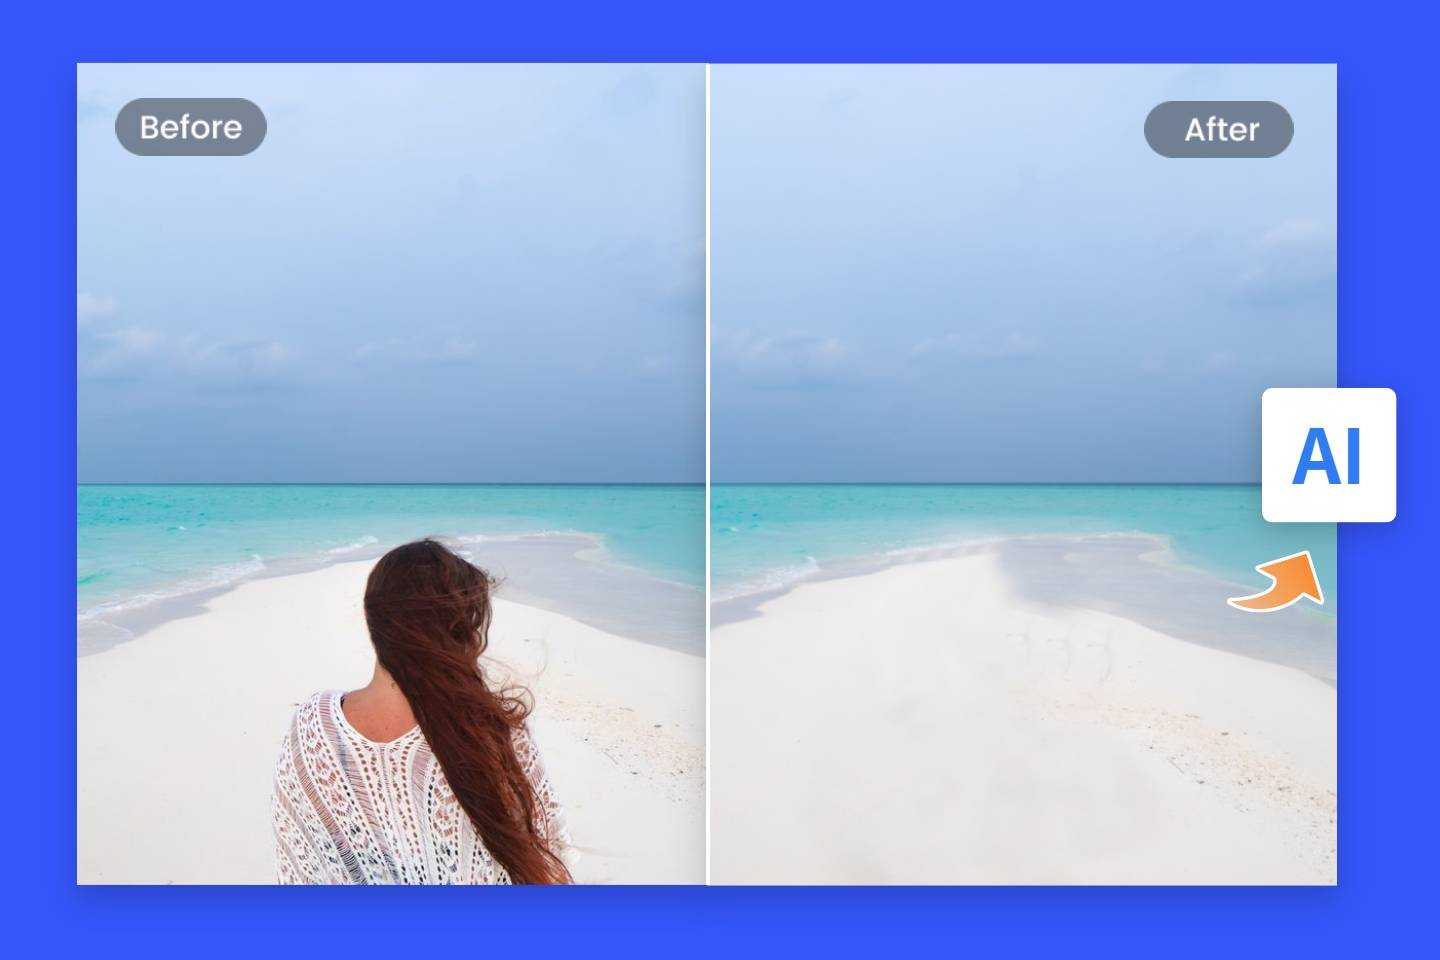 Remove people from photos online in seconds with Fotor's AI photo object remover tool